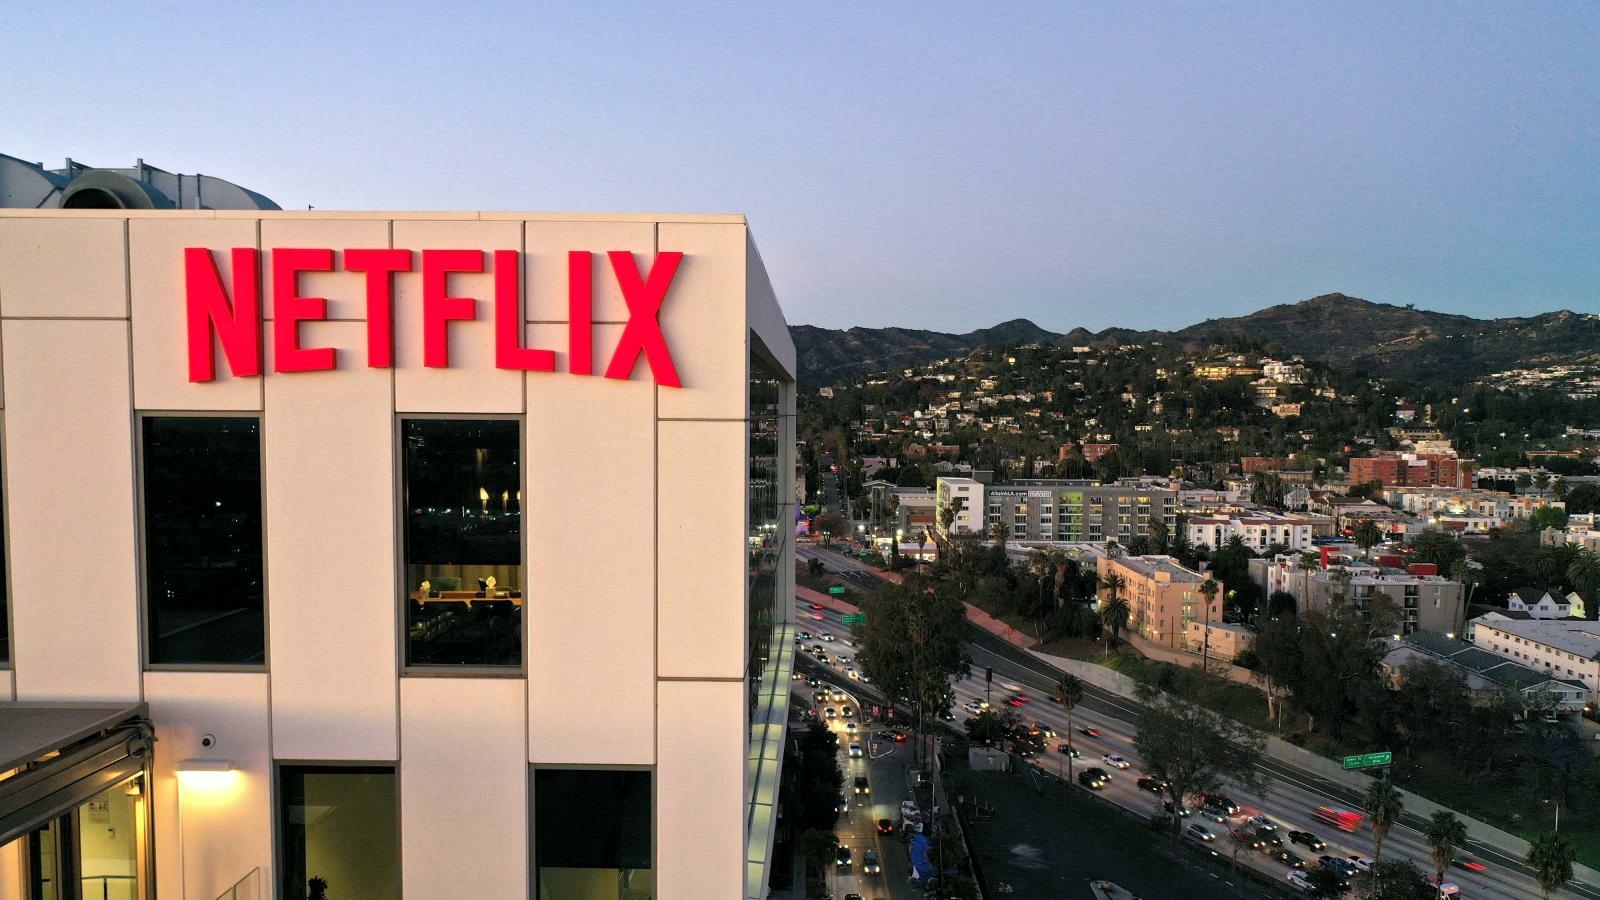 Is Netflix's best hope to be acquired by Microsoft?